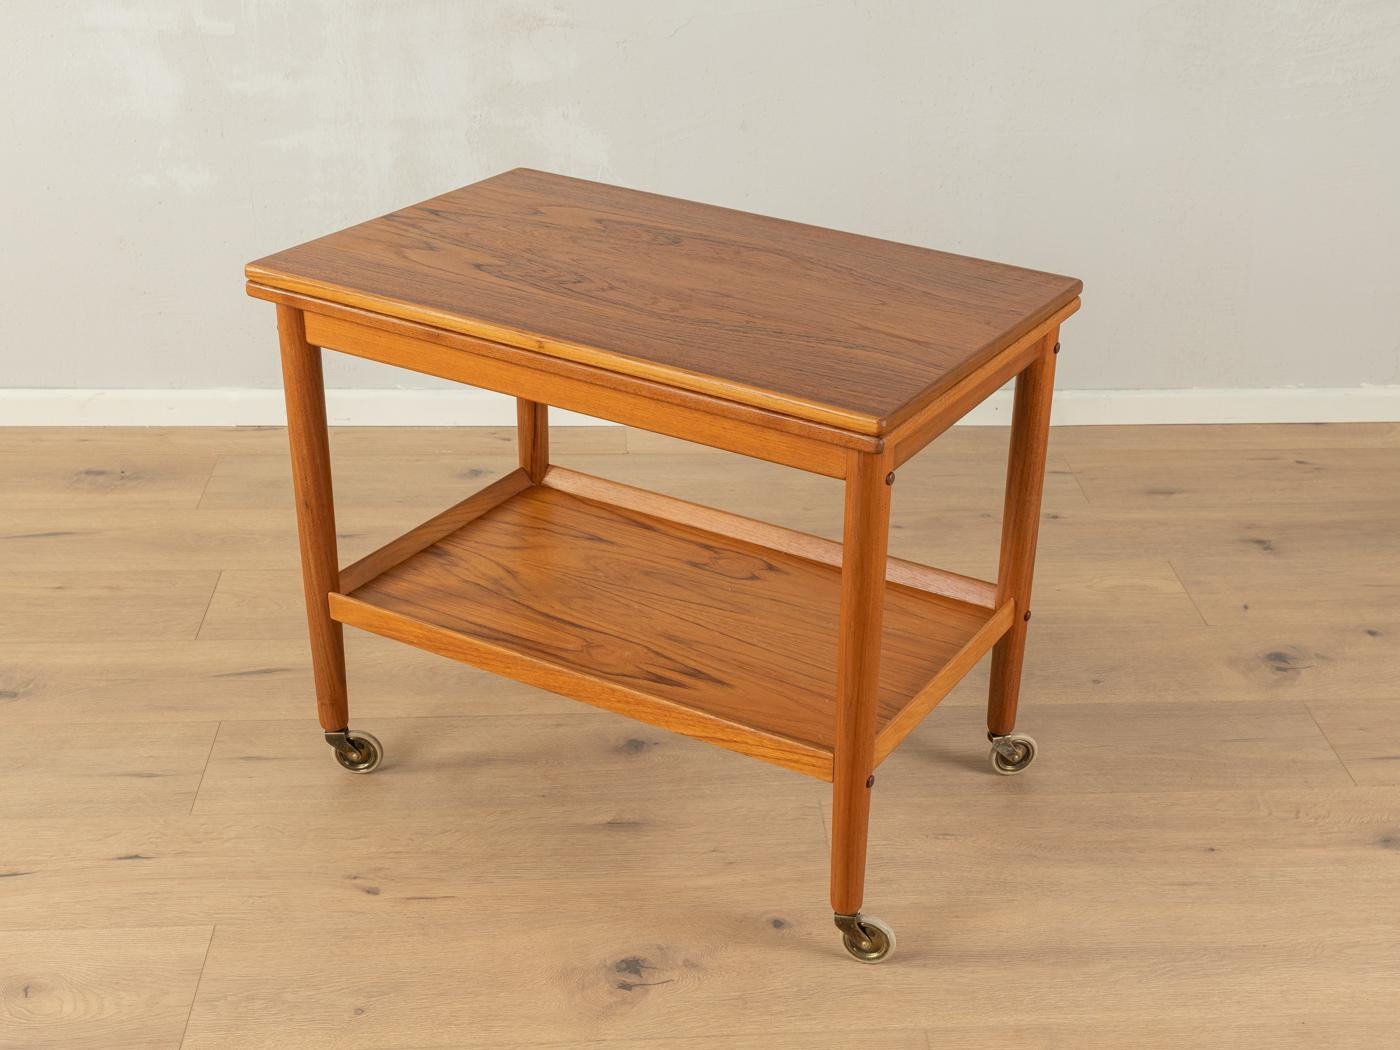 Wonderful serving trolley by Grete Jalk for Poul Jeppesen from the 1960s. Solid teak frame with two shelves in teak veneer and brass castors. The upper shelf can be rotated by 90° and then unfolded.
Extended top shelf: 90 x 70 cm 

Quality